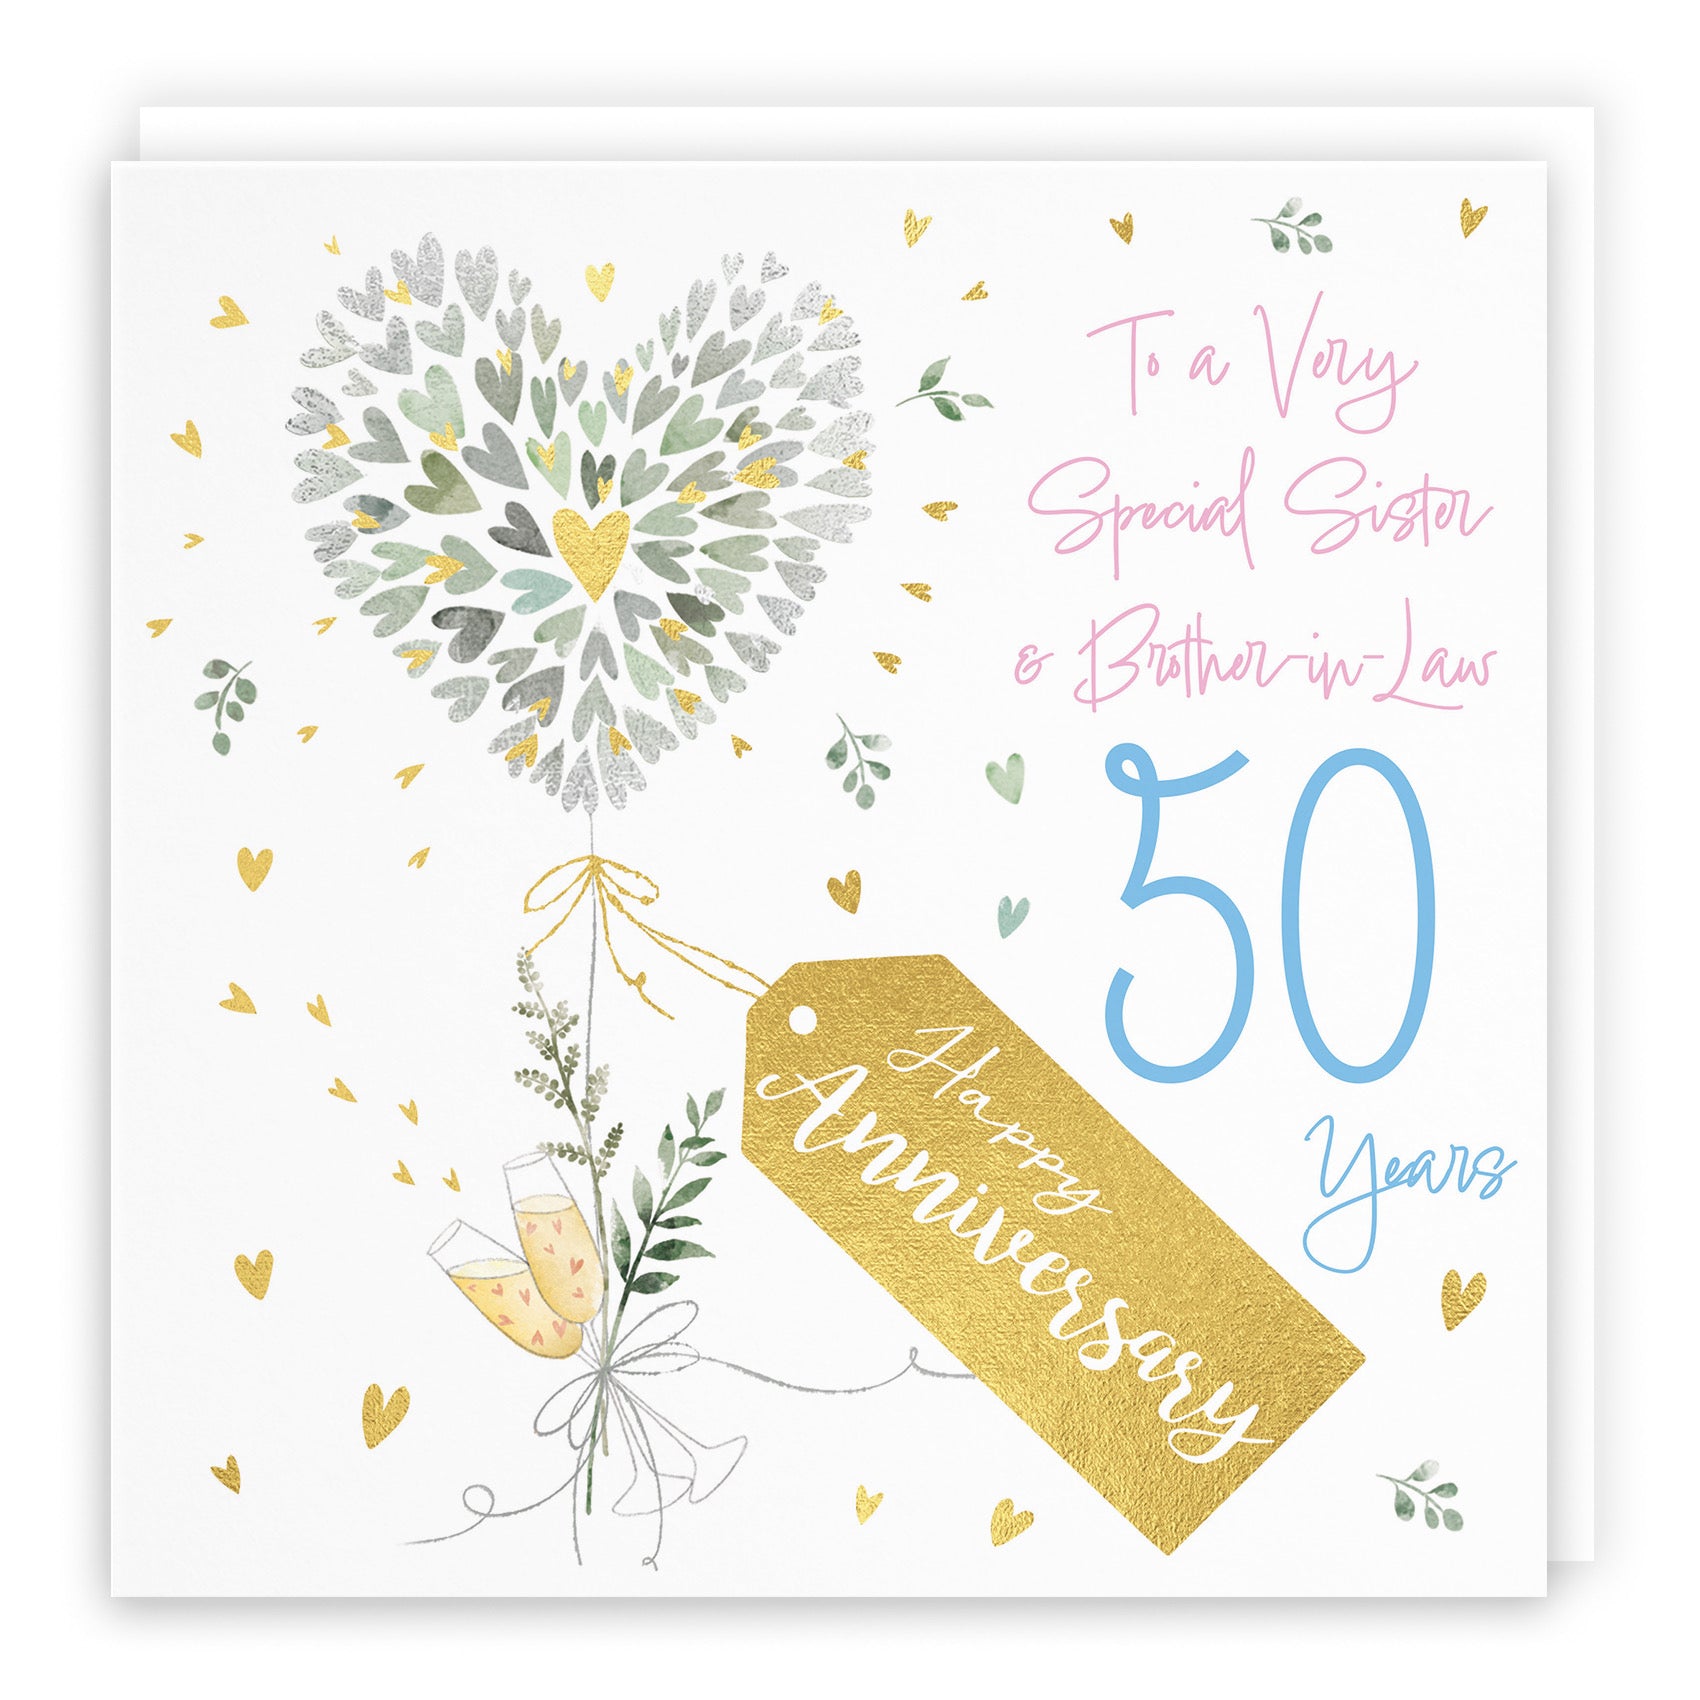 Sister And Brother-in-Law 50th Anniversary Card Contemporary Hearts Milo's Gallery - Default Title (B0CKJ3PLDK)